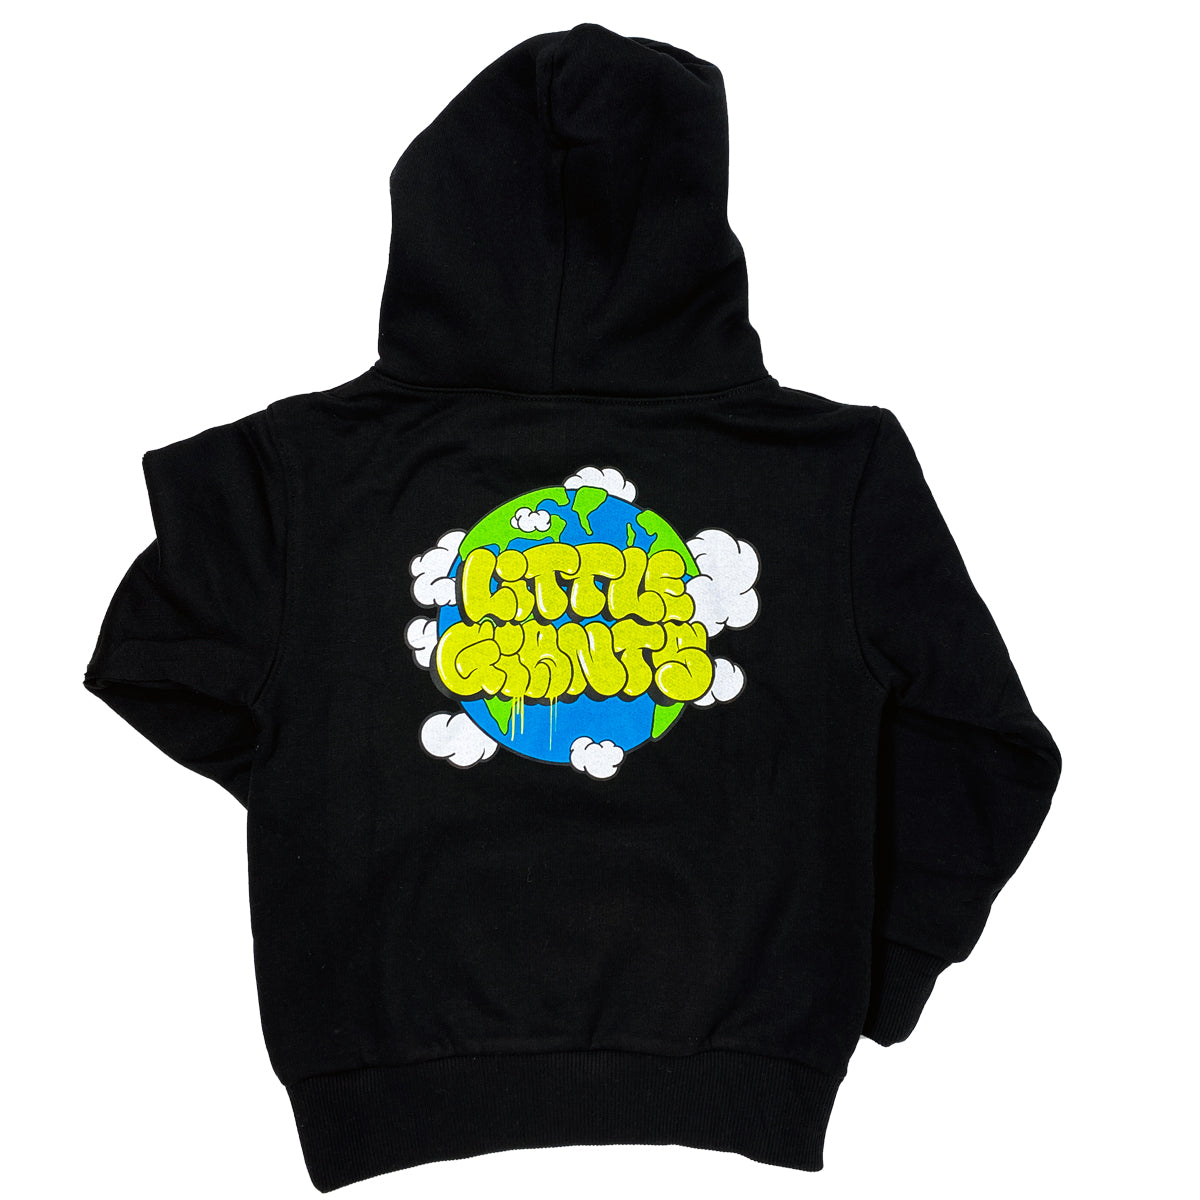 Know Your Home Hoodie (Black)